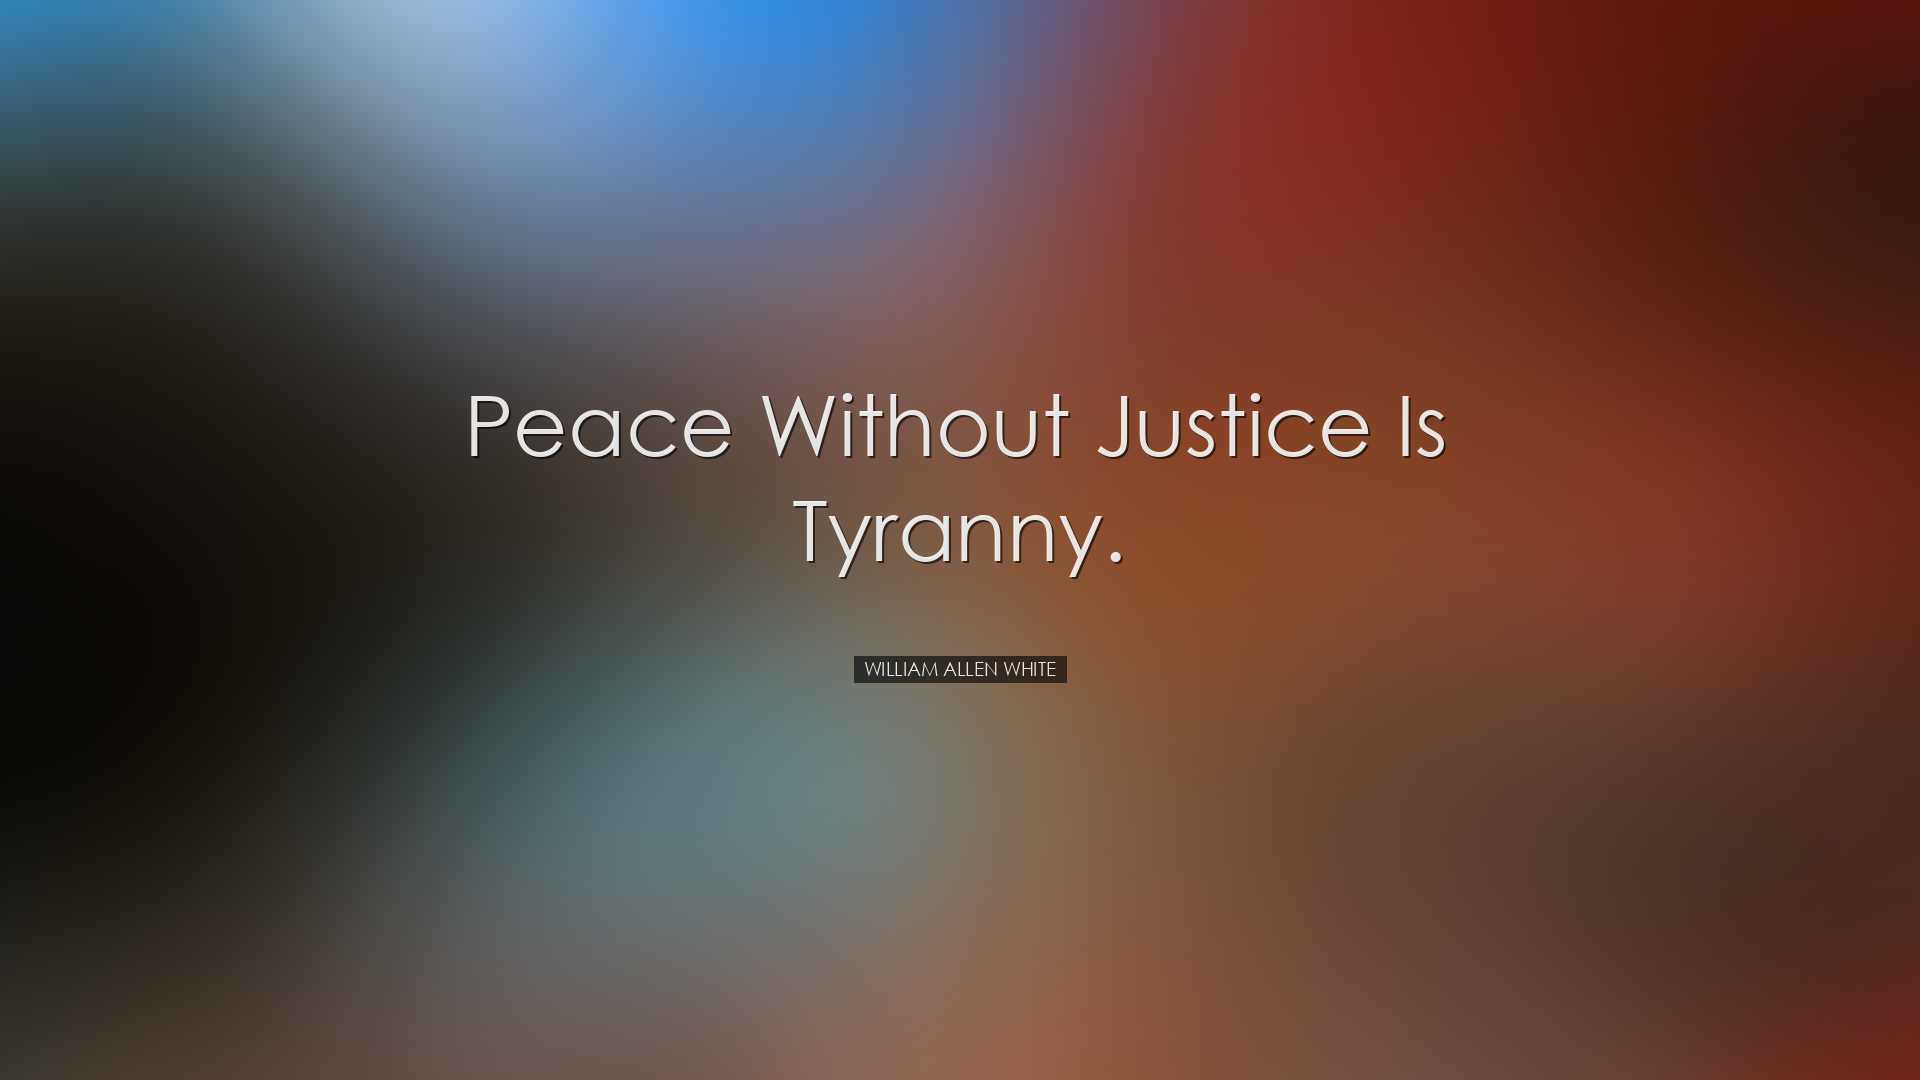 Peace without justice is tyranny. - William Allen White